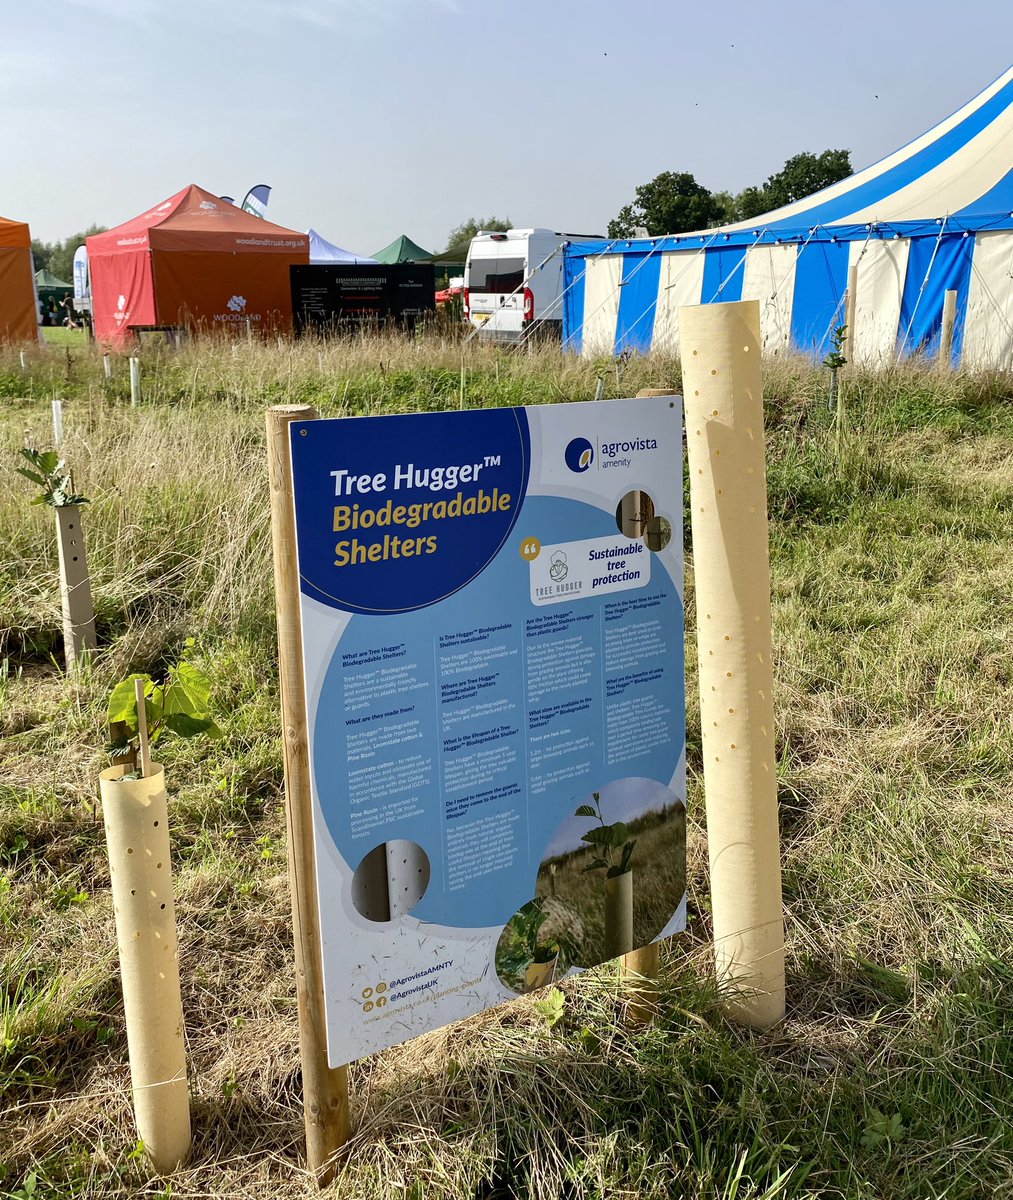 So much to learn about #treeprotection and alternatives to #plastic 🌳 Year 3 of 5 year field trial with potato, wood and corn, looking at possible test sites in #northumberland 🌳
Wool and recycled versions on display too #AgroforestryShow @GreenerN_land @WoodlandTrust